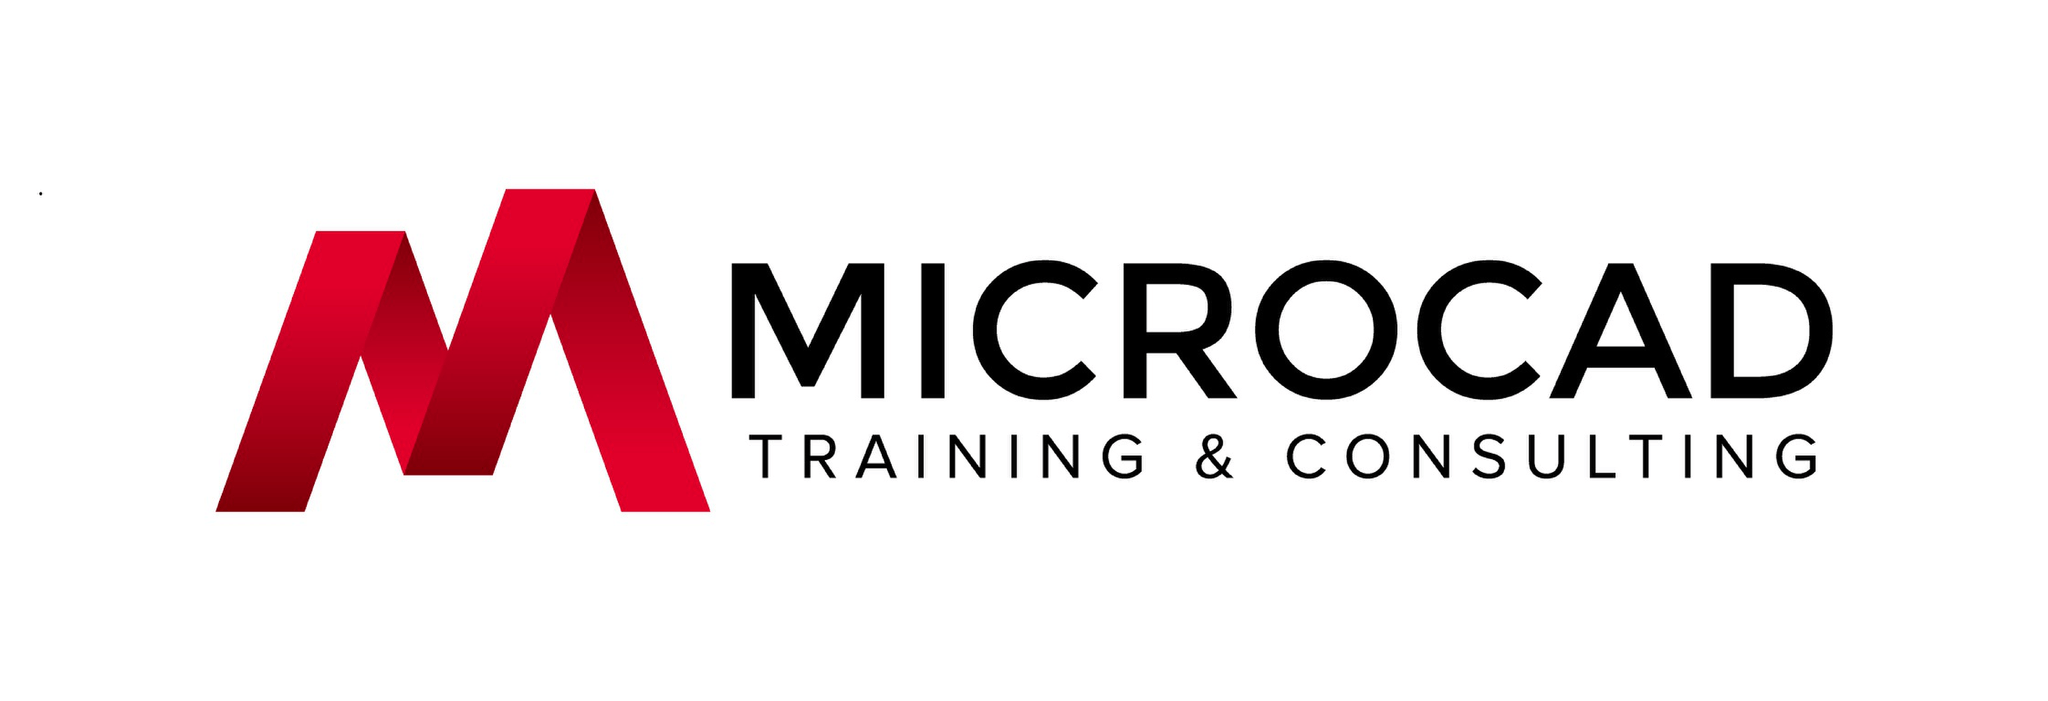 Microcad Training & Consulting